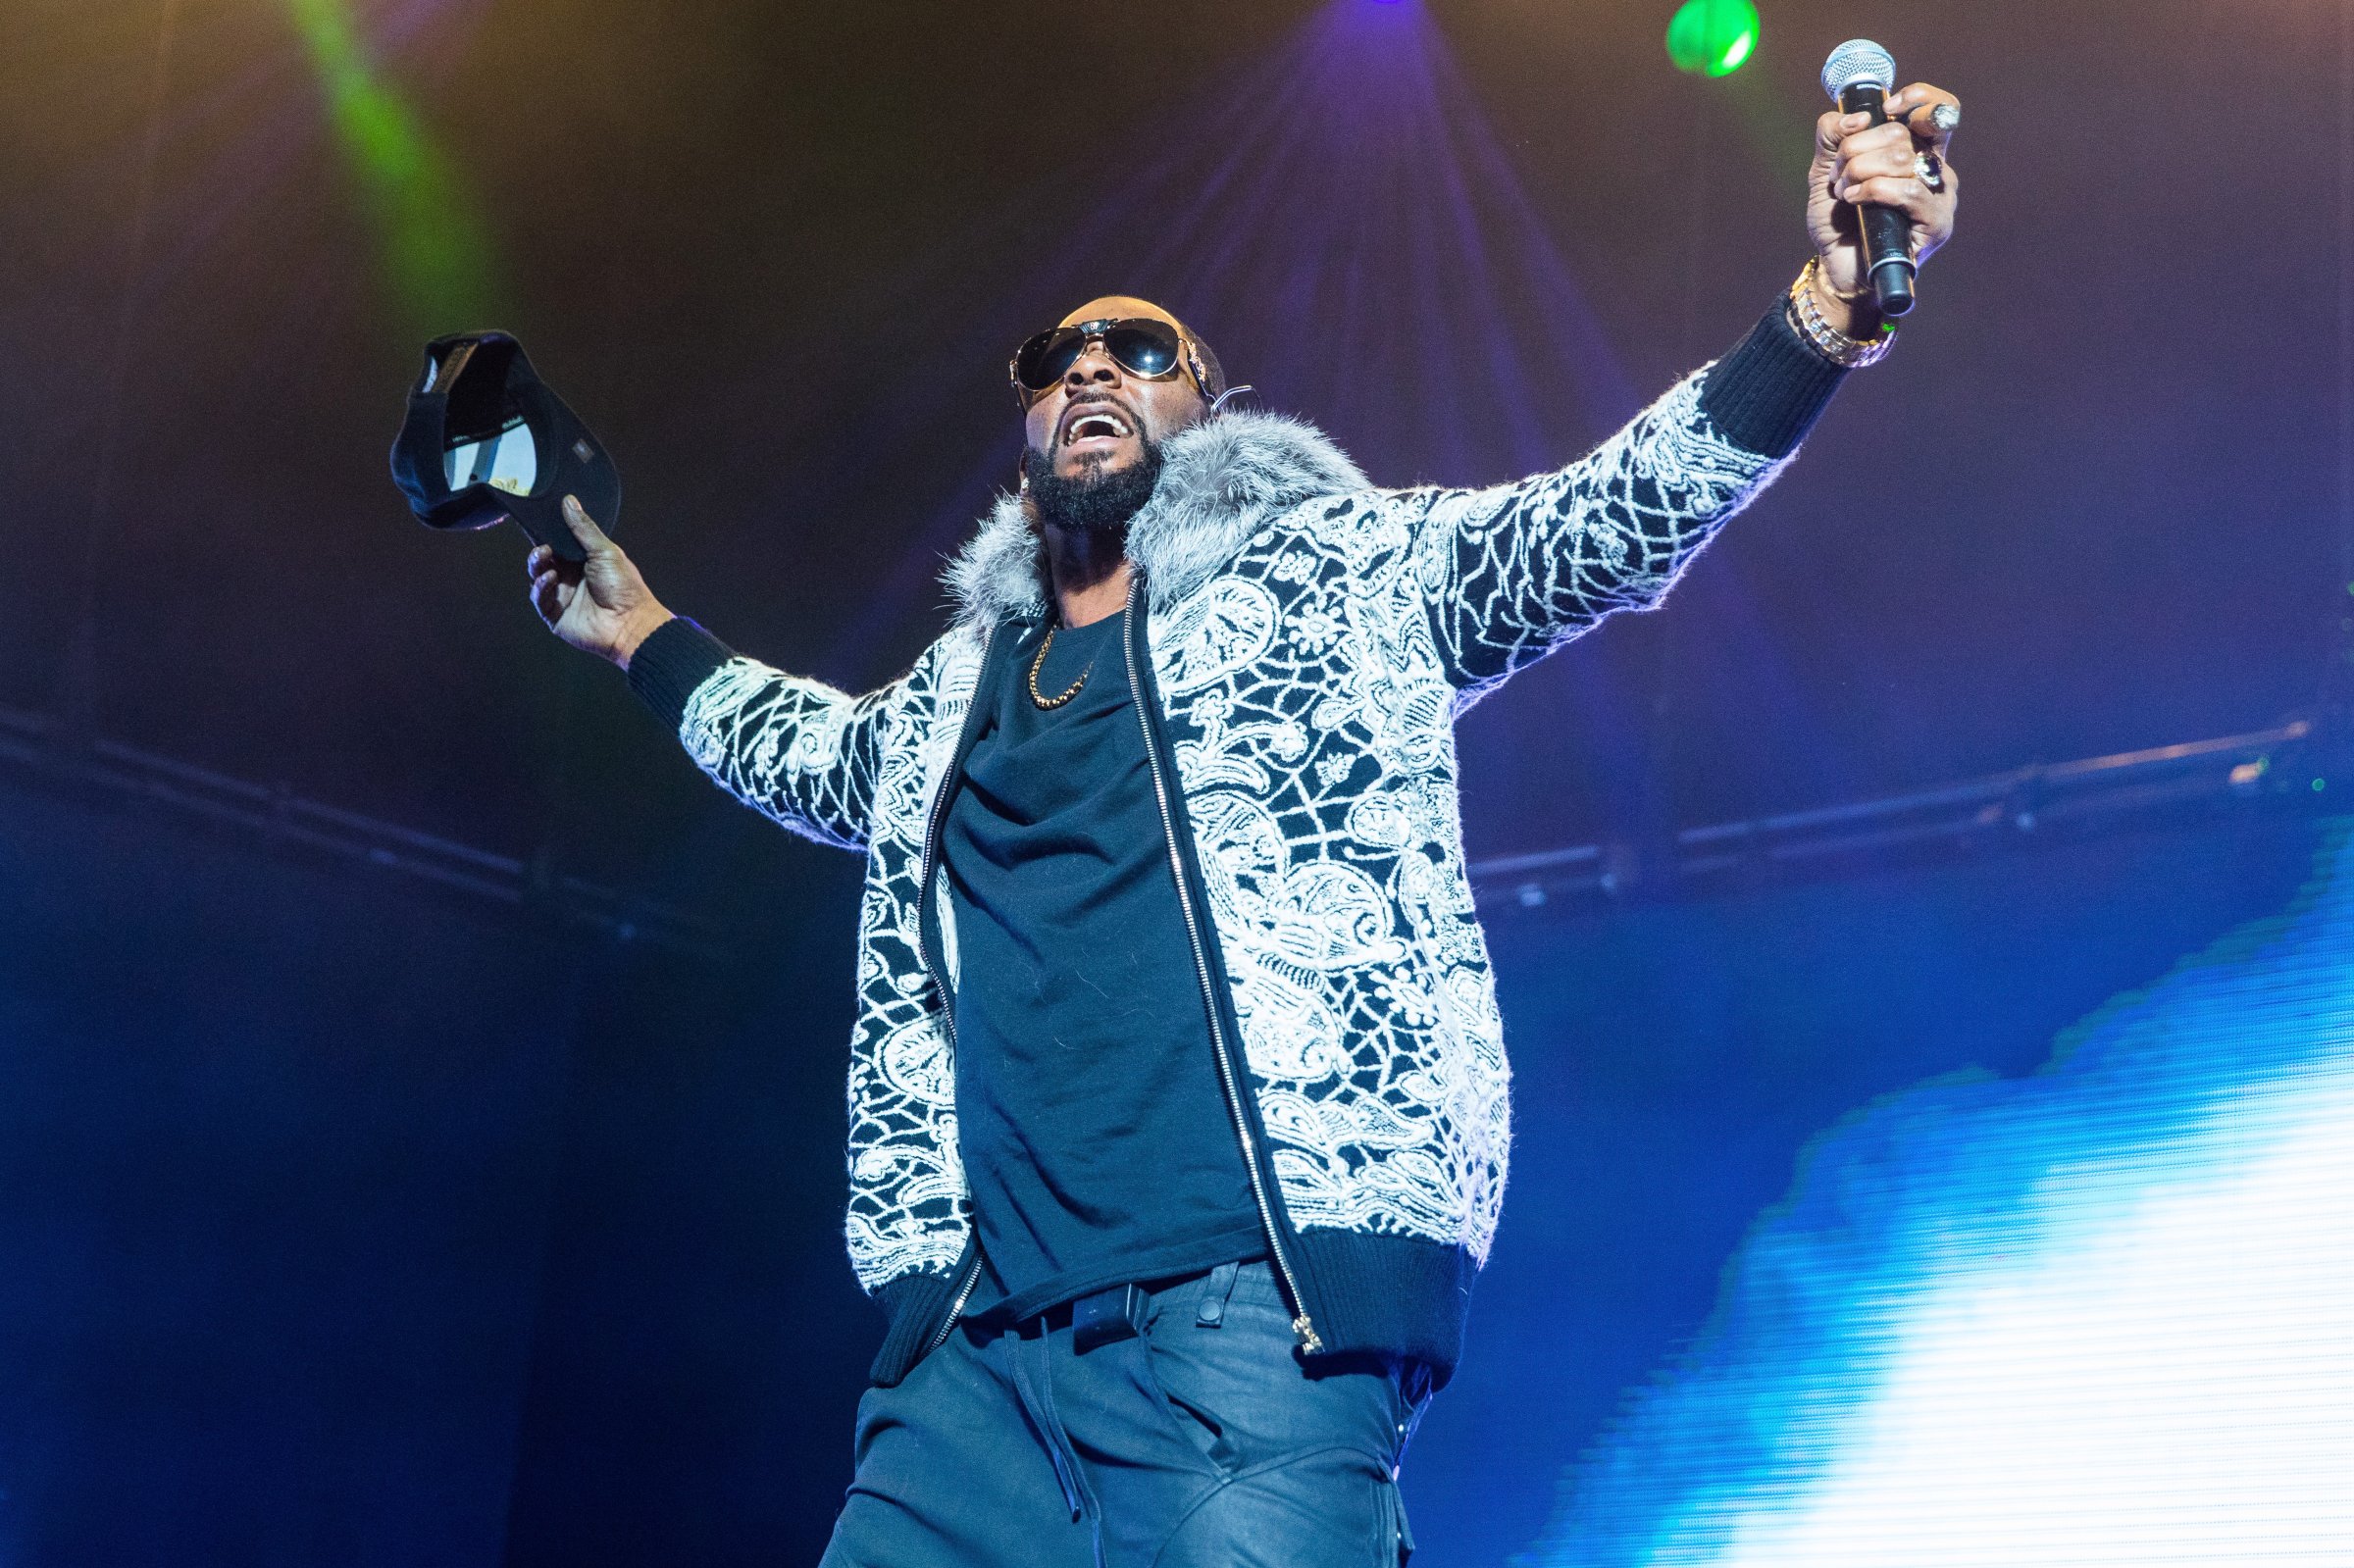 R. Kelly wears a fuzzy jacket and raises his arms to the side during concert